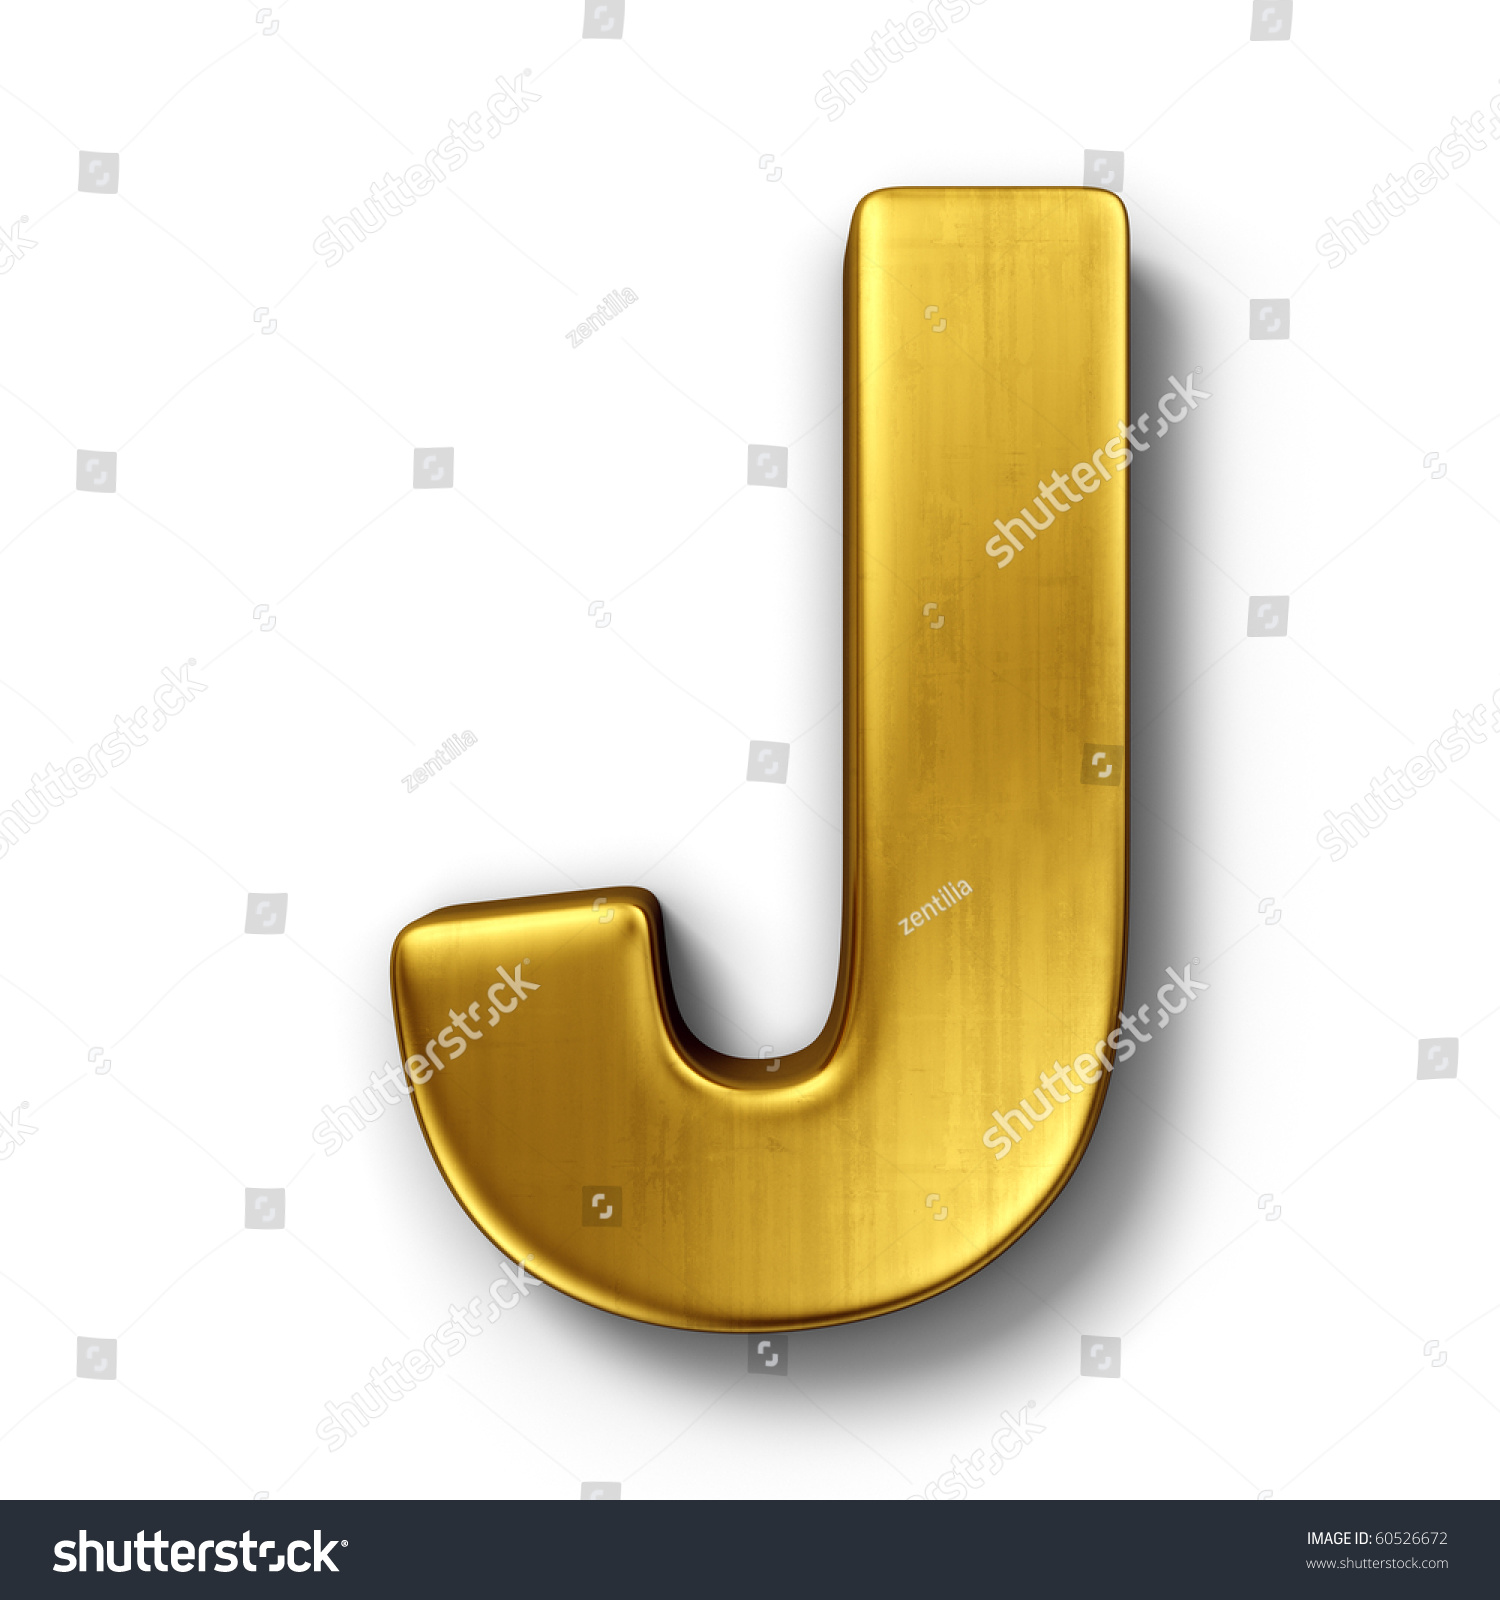 3d Rendering Of The Letter J In Gold Metal On A White Isolated ...